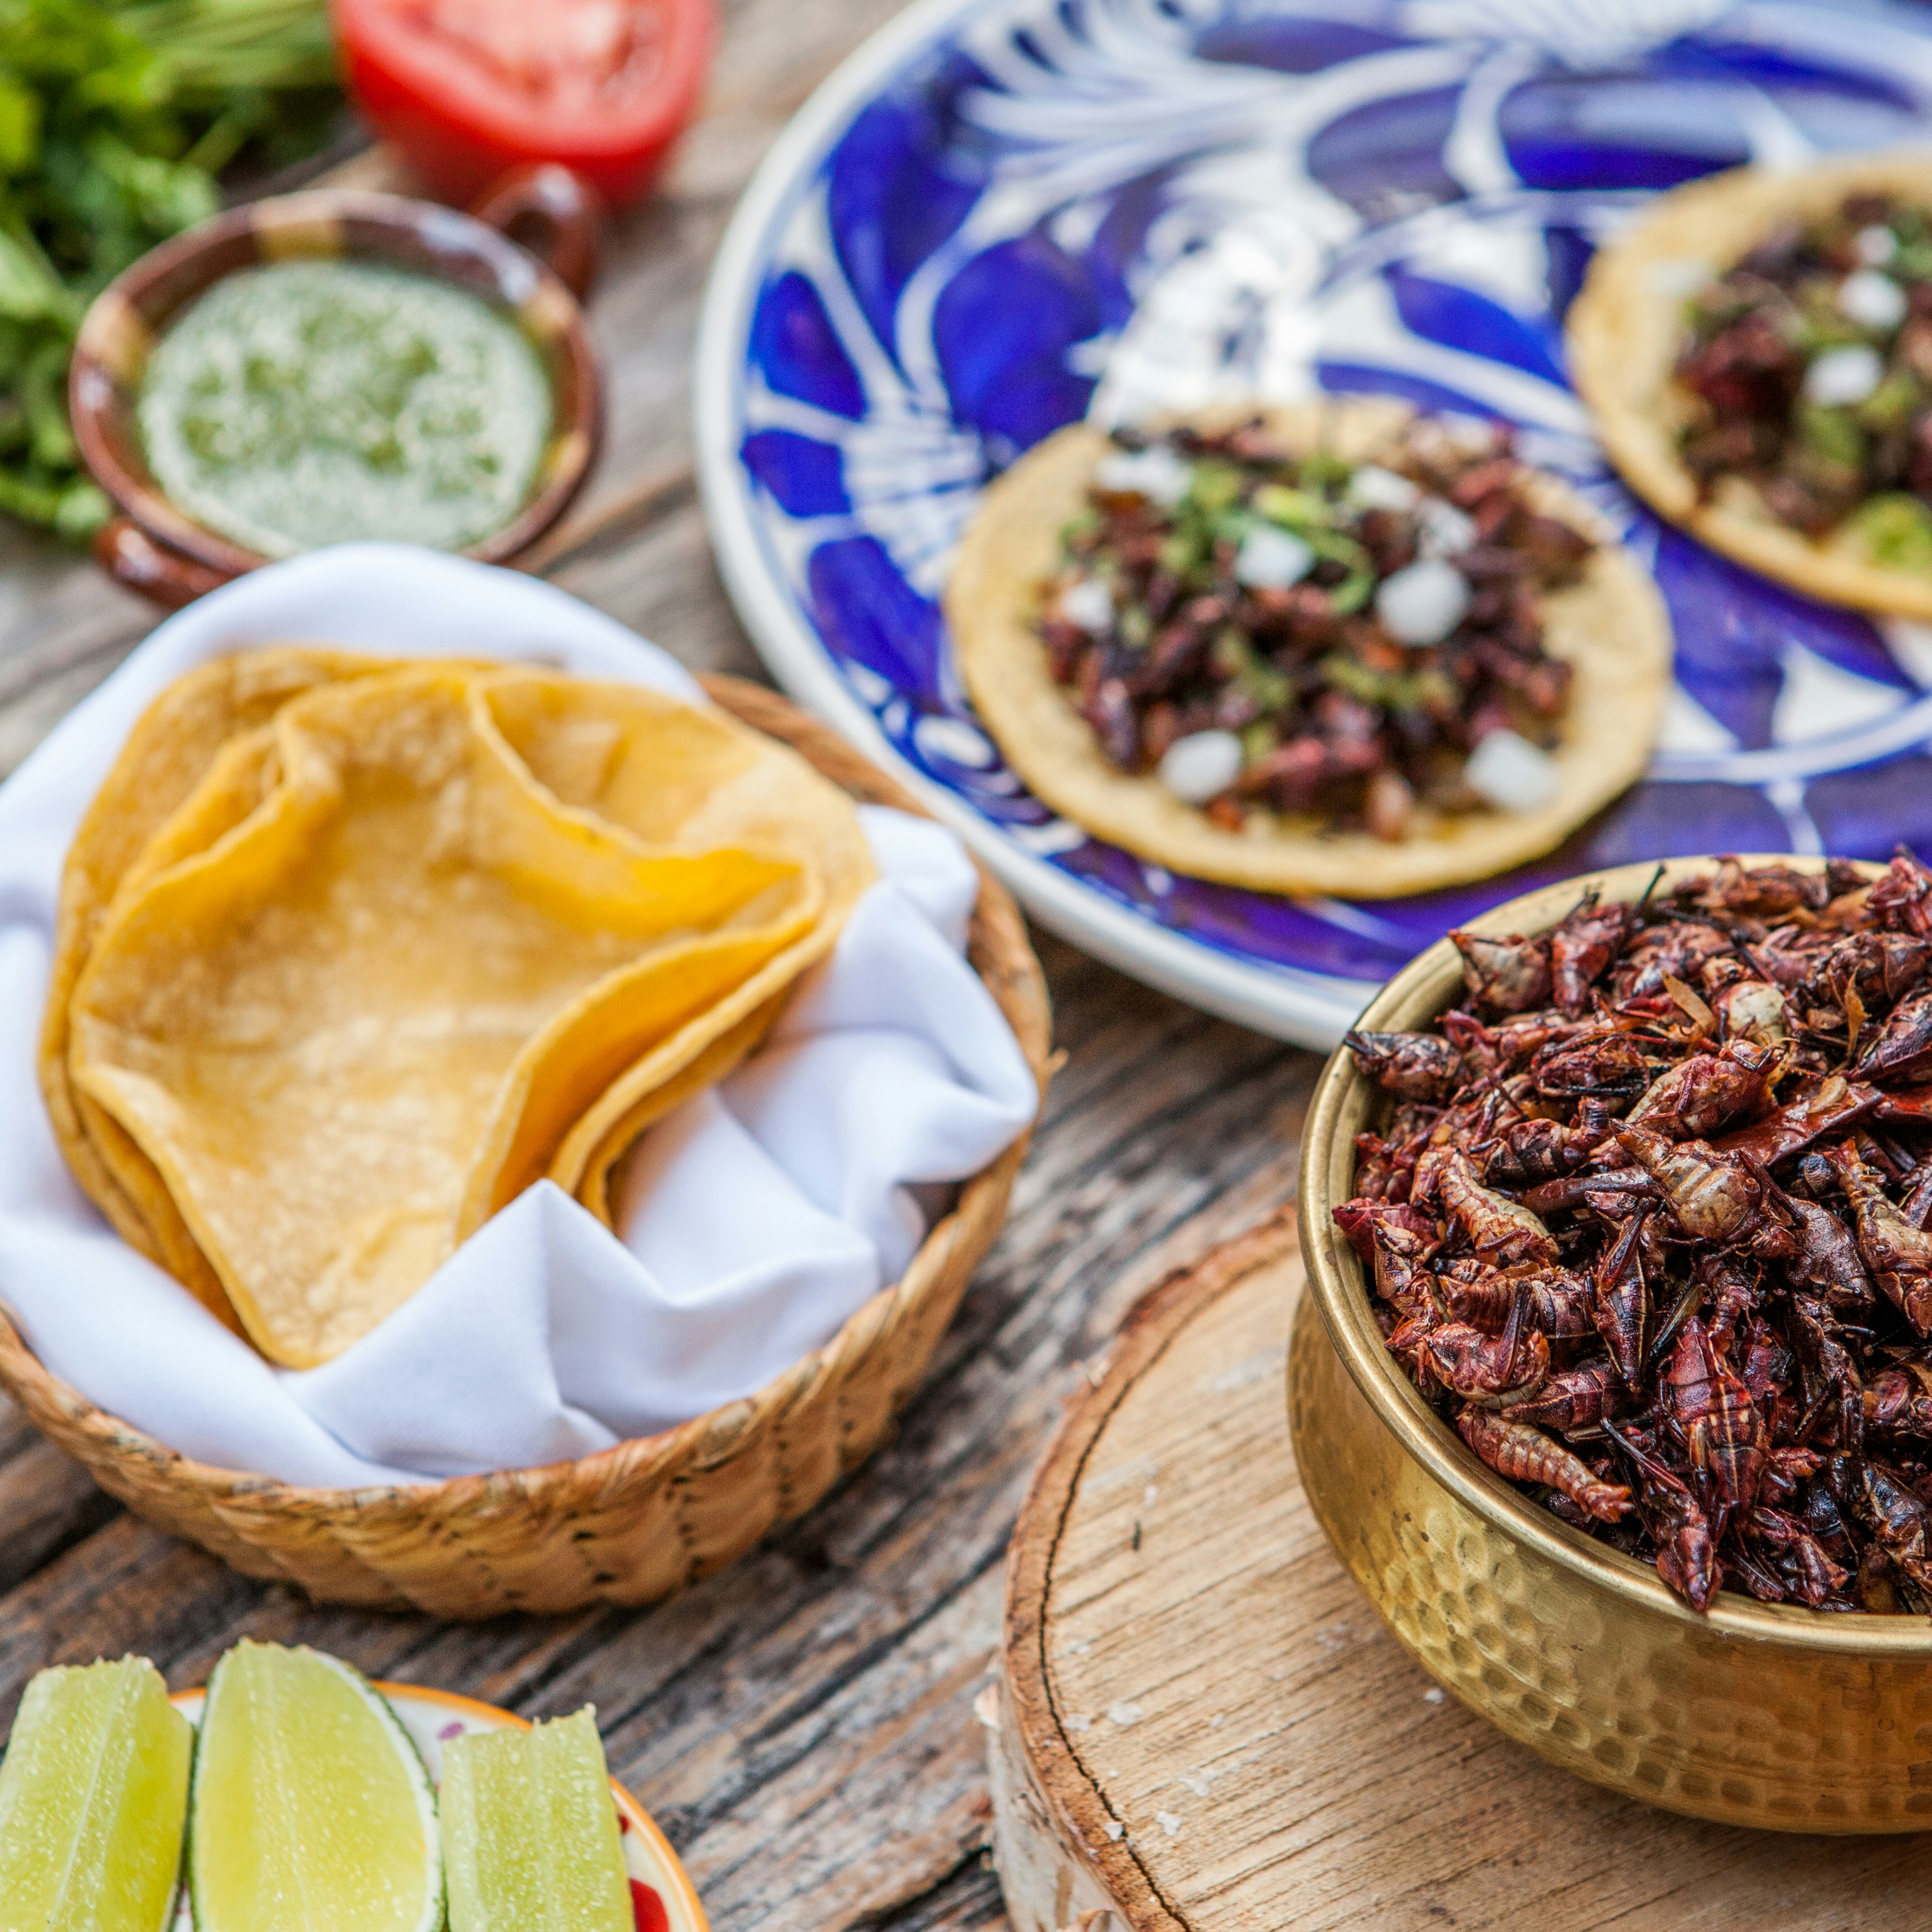 Large Mexican food spread containing corn tortillas, dried chillies, slices of lime, a small ceramic jar of green sauce, a basket full of cooke grasshoppers and two fully assembled tacos on a large blue and white plate 